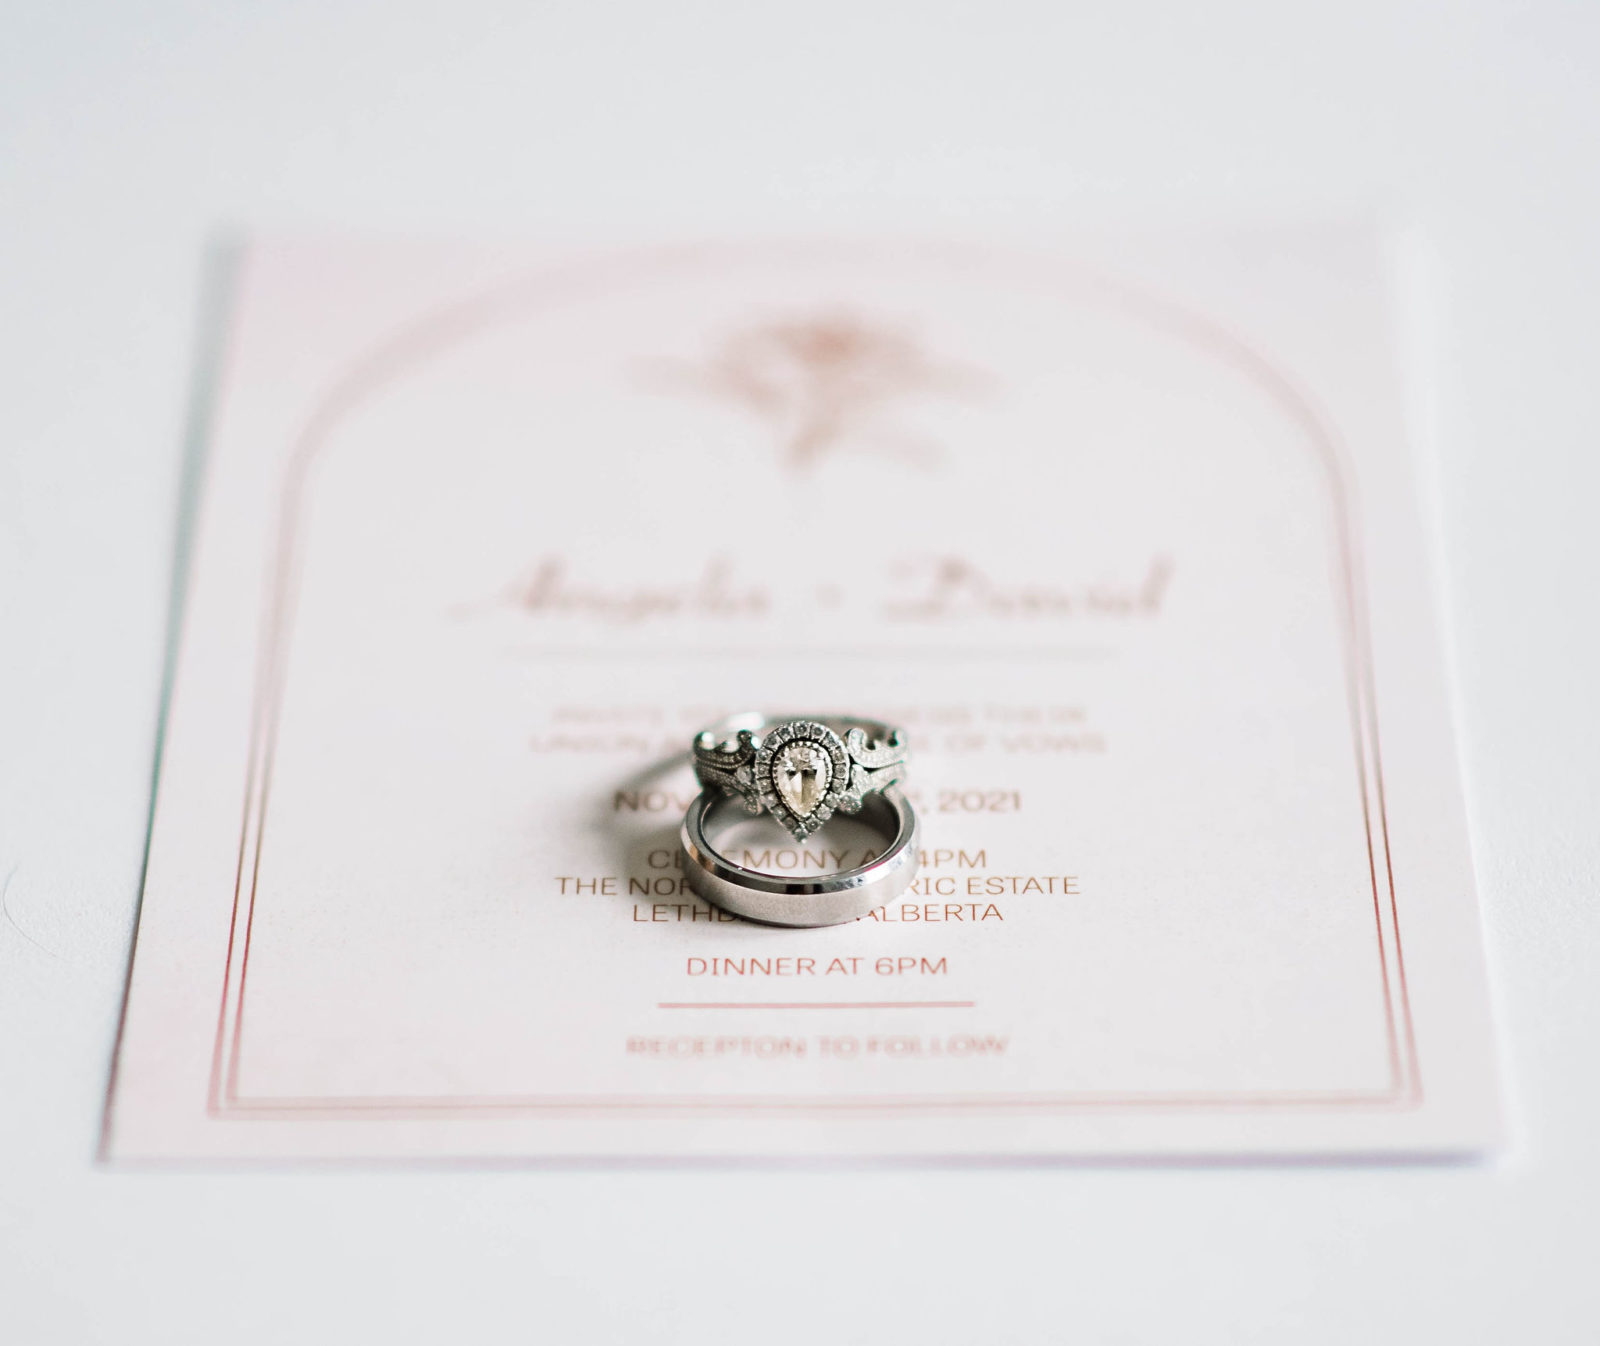 Vera Wang engagement ring photographed on white and pink classic wedding stationery